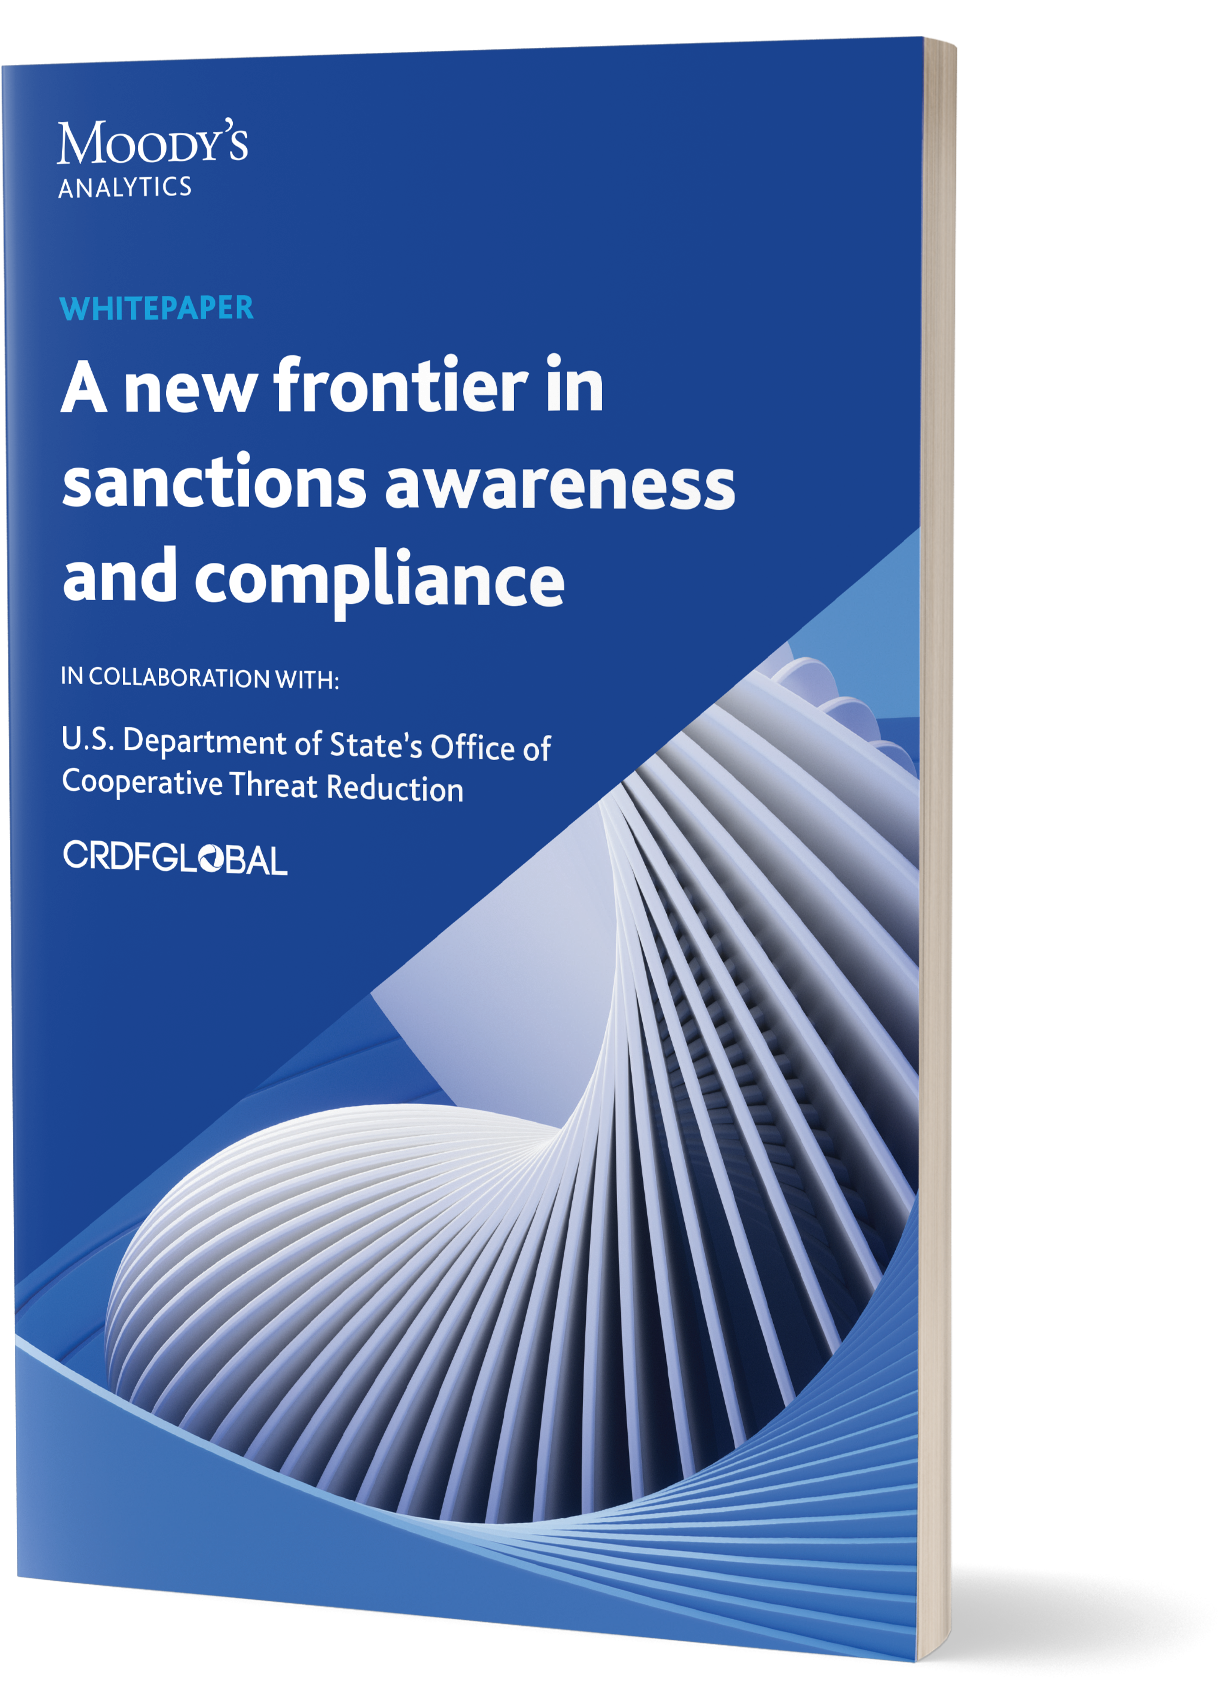 A new frontier in sanctions awareness and compliance